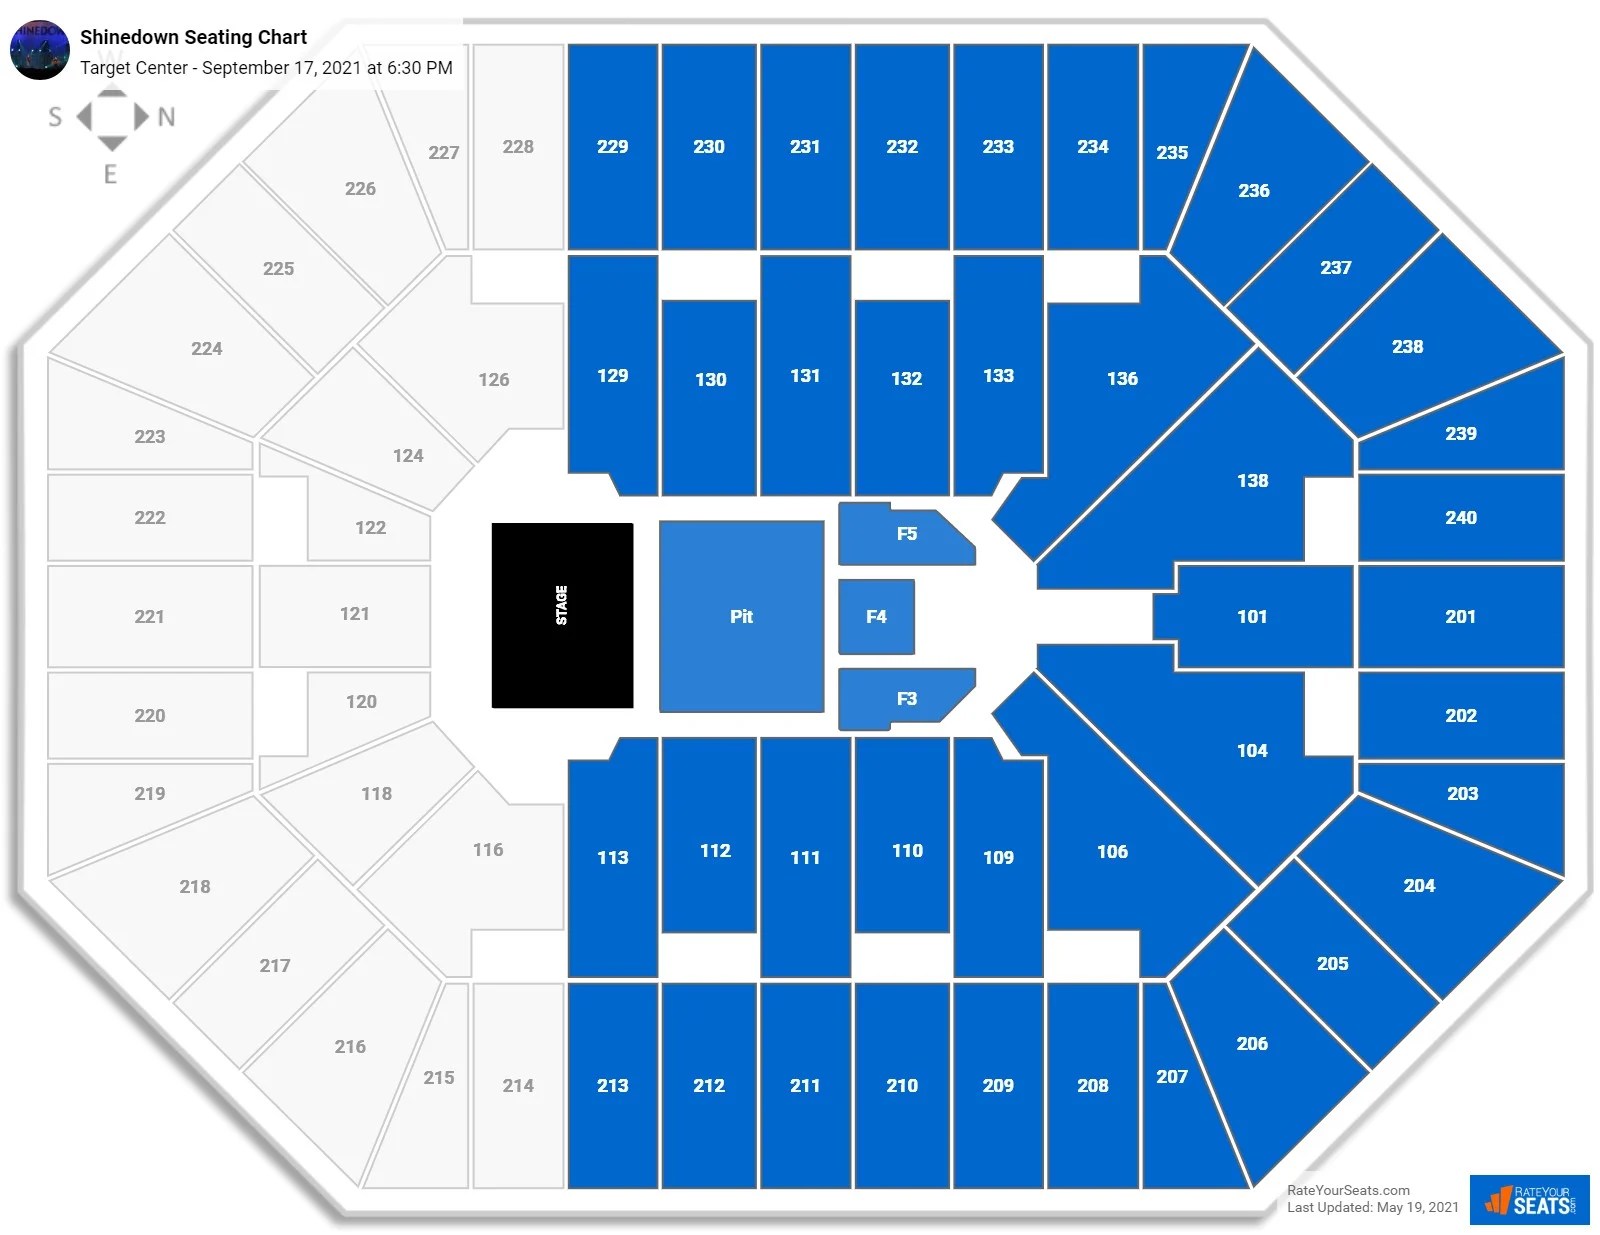 Target Center Seating Charts for Concerts